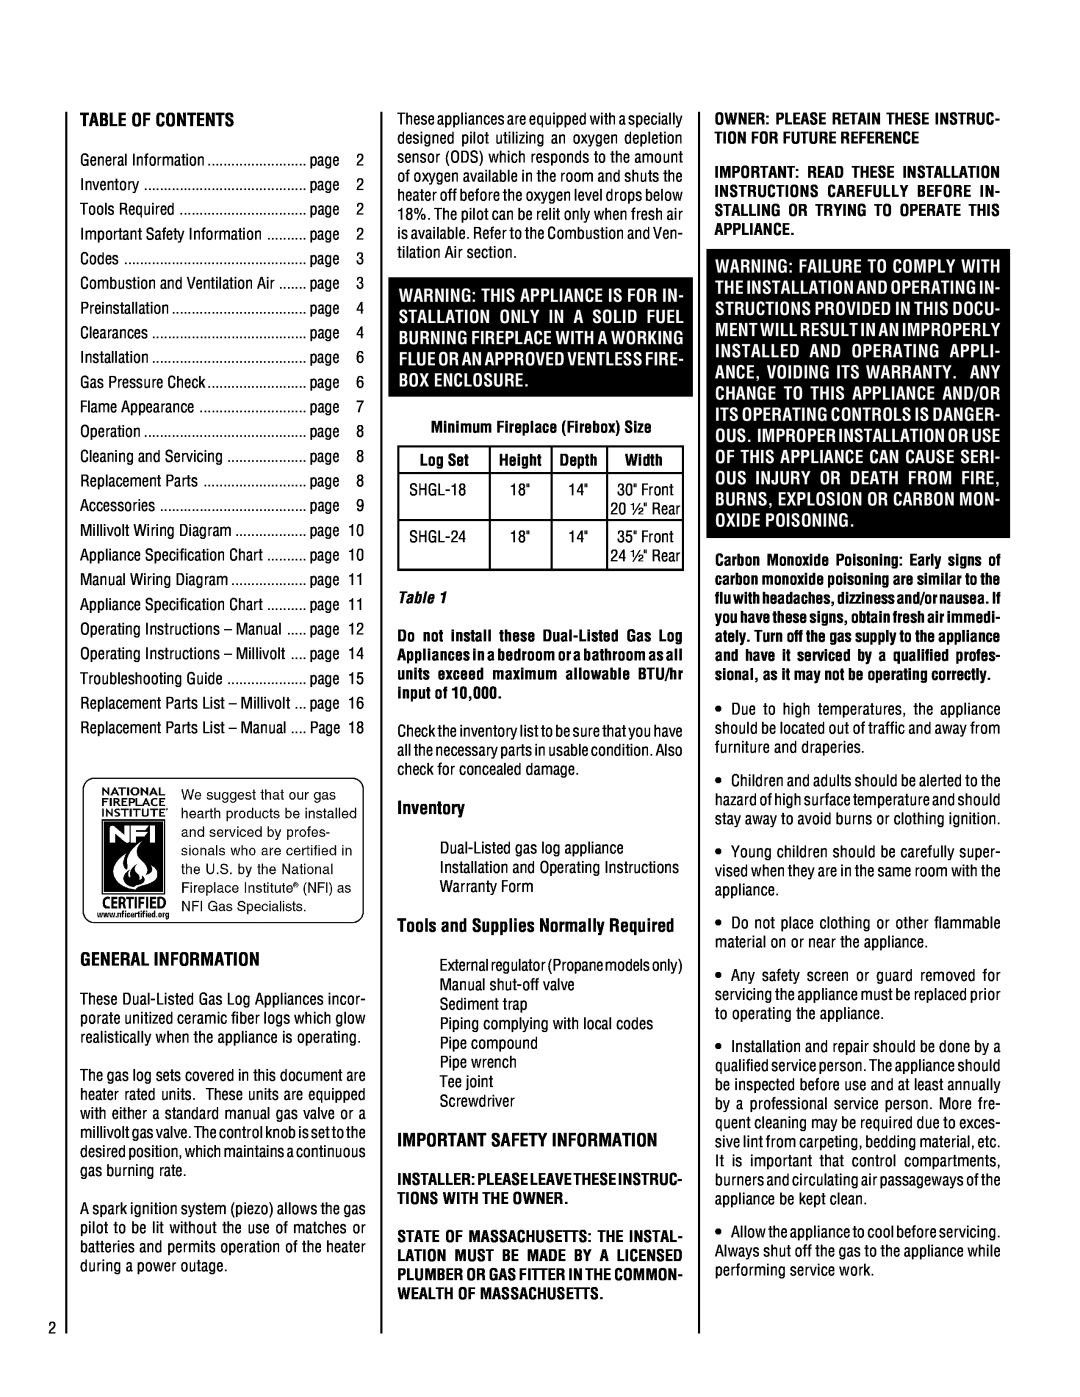 Lennox Hearth SHGL-18MP-R, SHGL-18MN-R Table Of Contents, General Information, Inventory, Important Safety Information 